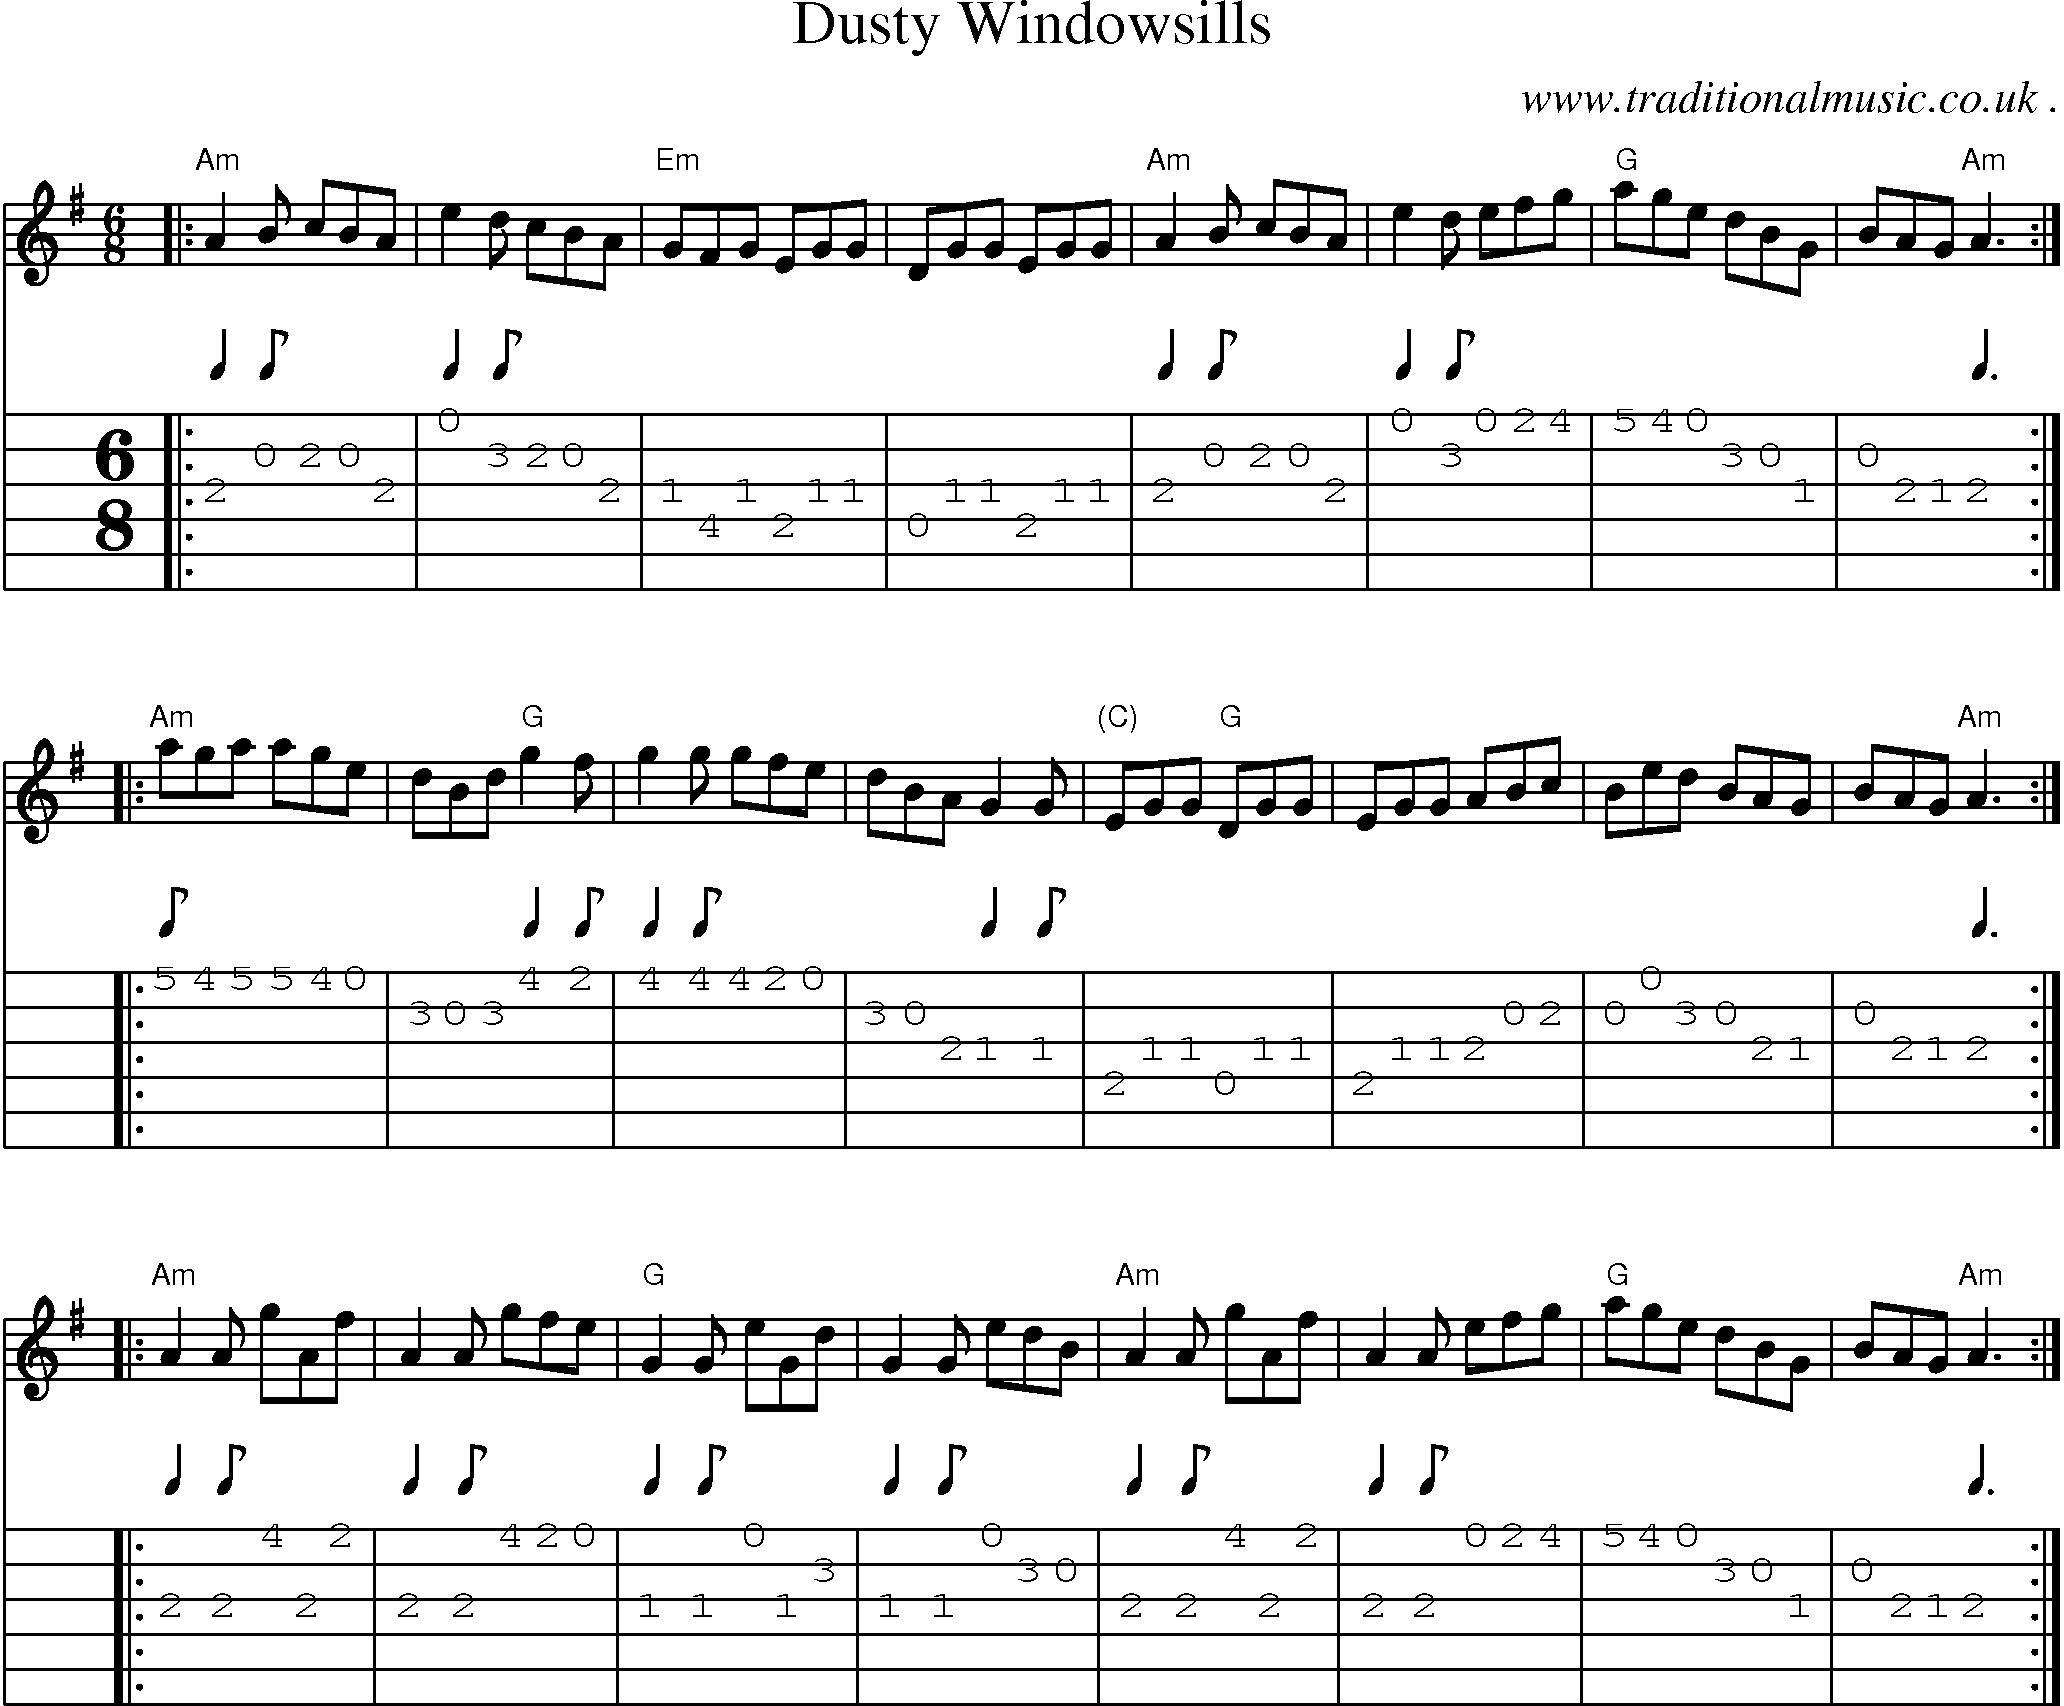 Sheet-music  score, Chords and Guitar Tabs for Dusty Windowsills